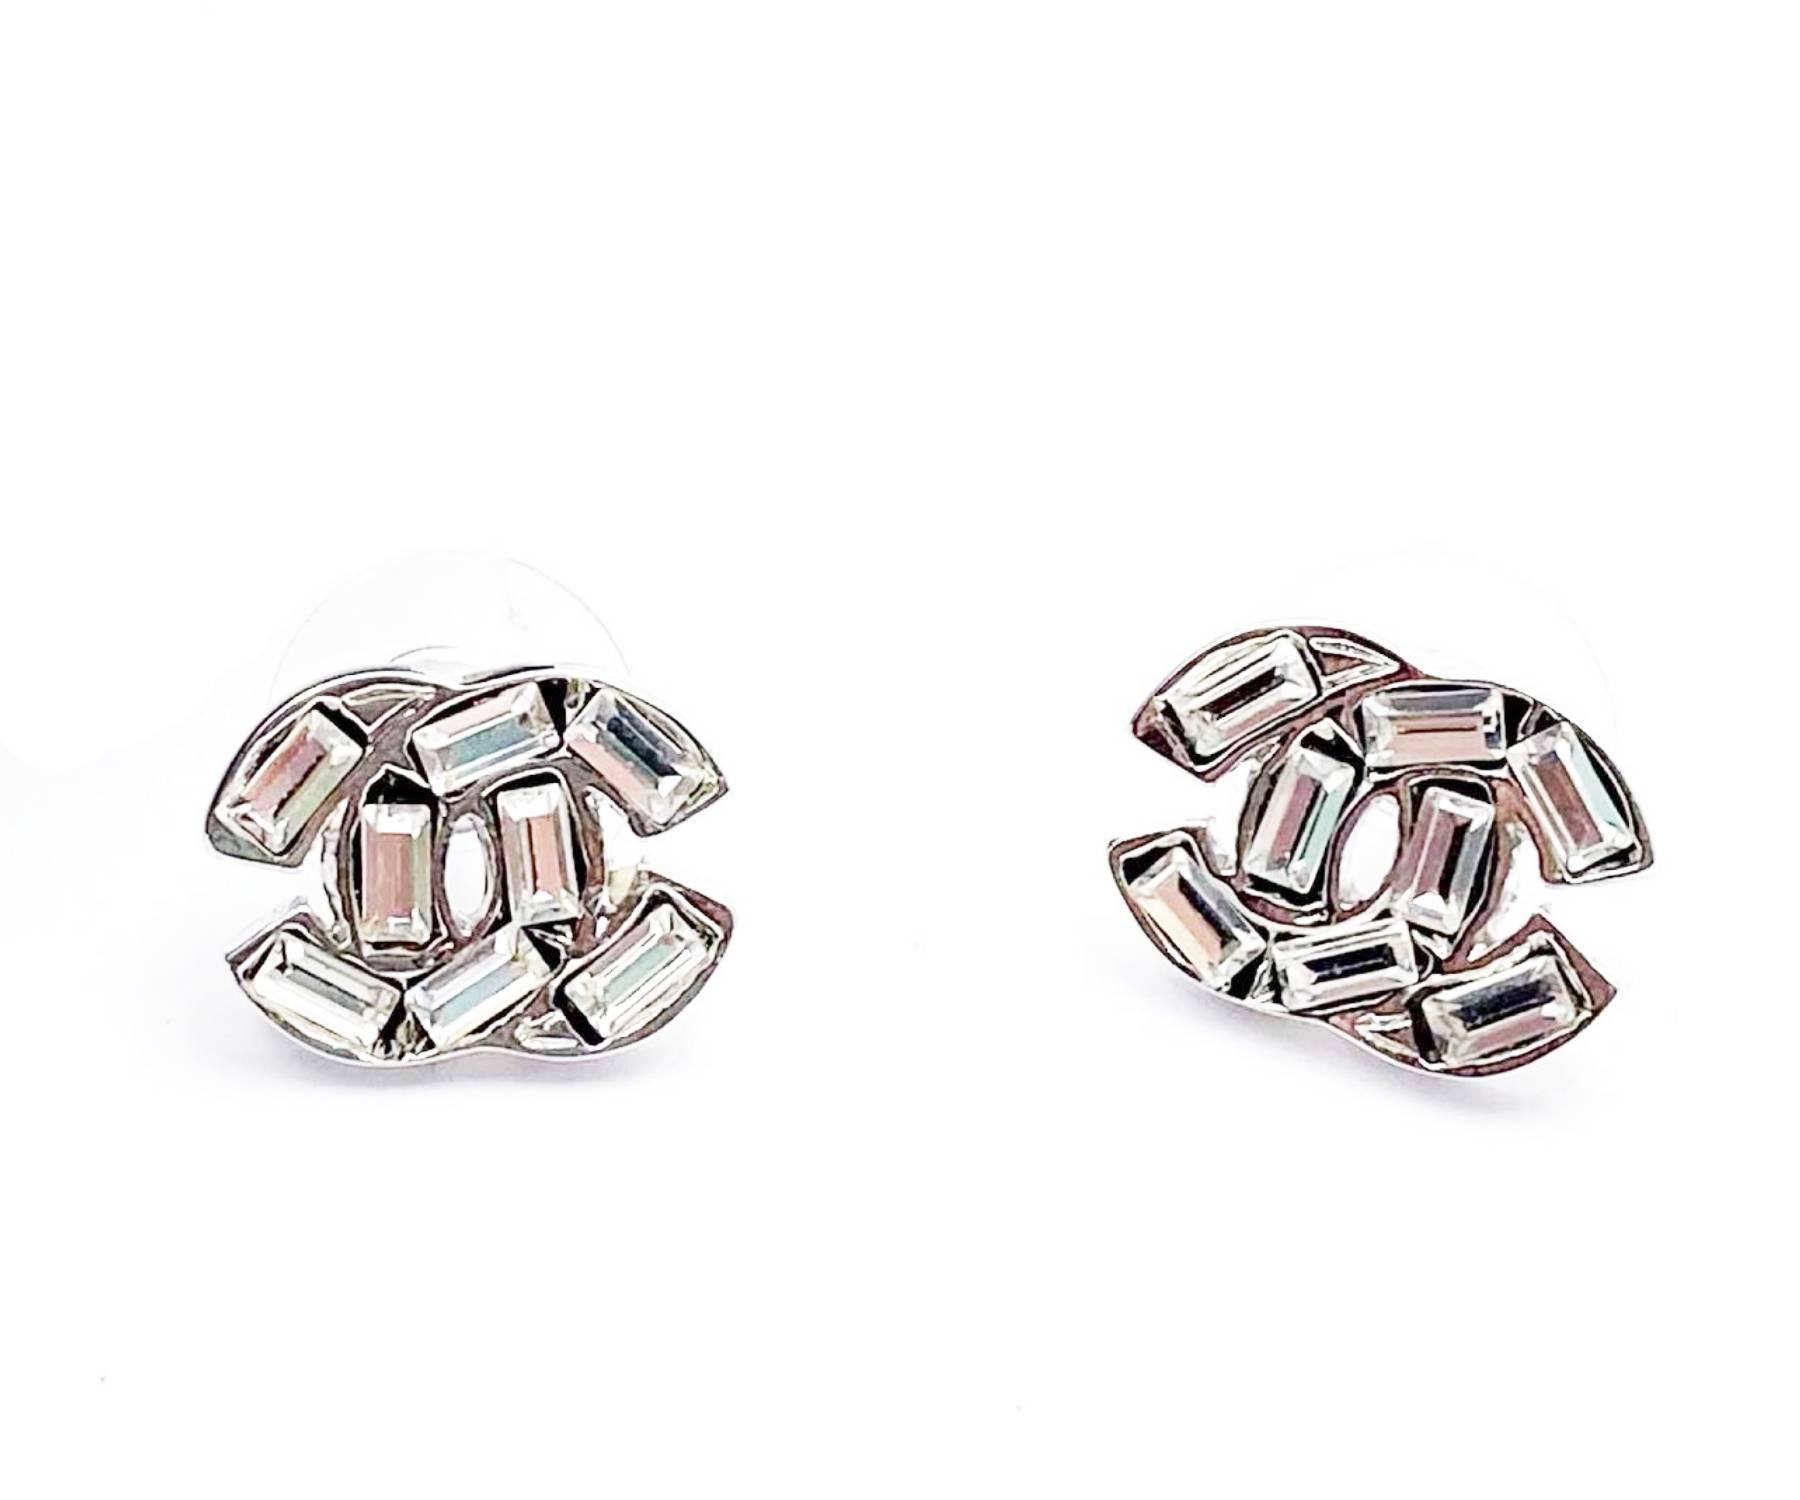 Chanel Silver CC  Baguette Stud Piercing Earrings

*Marked 01
*Made in France
*Comes with the original box
 
-It is approximately 0.6